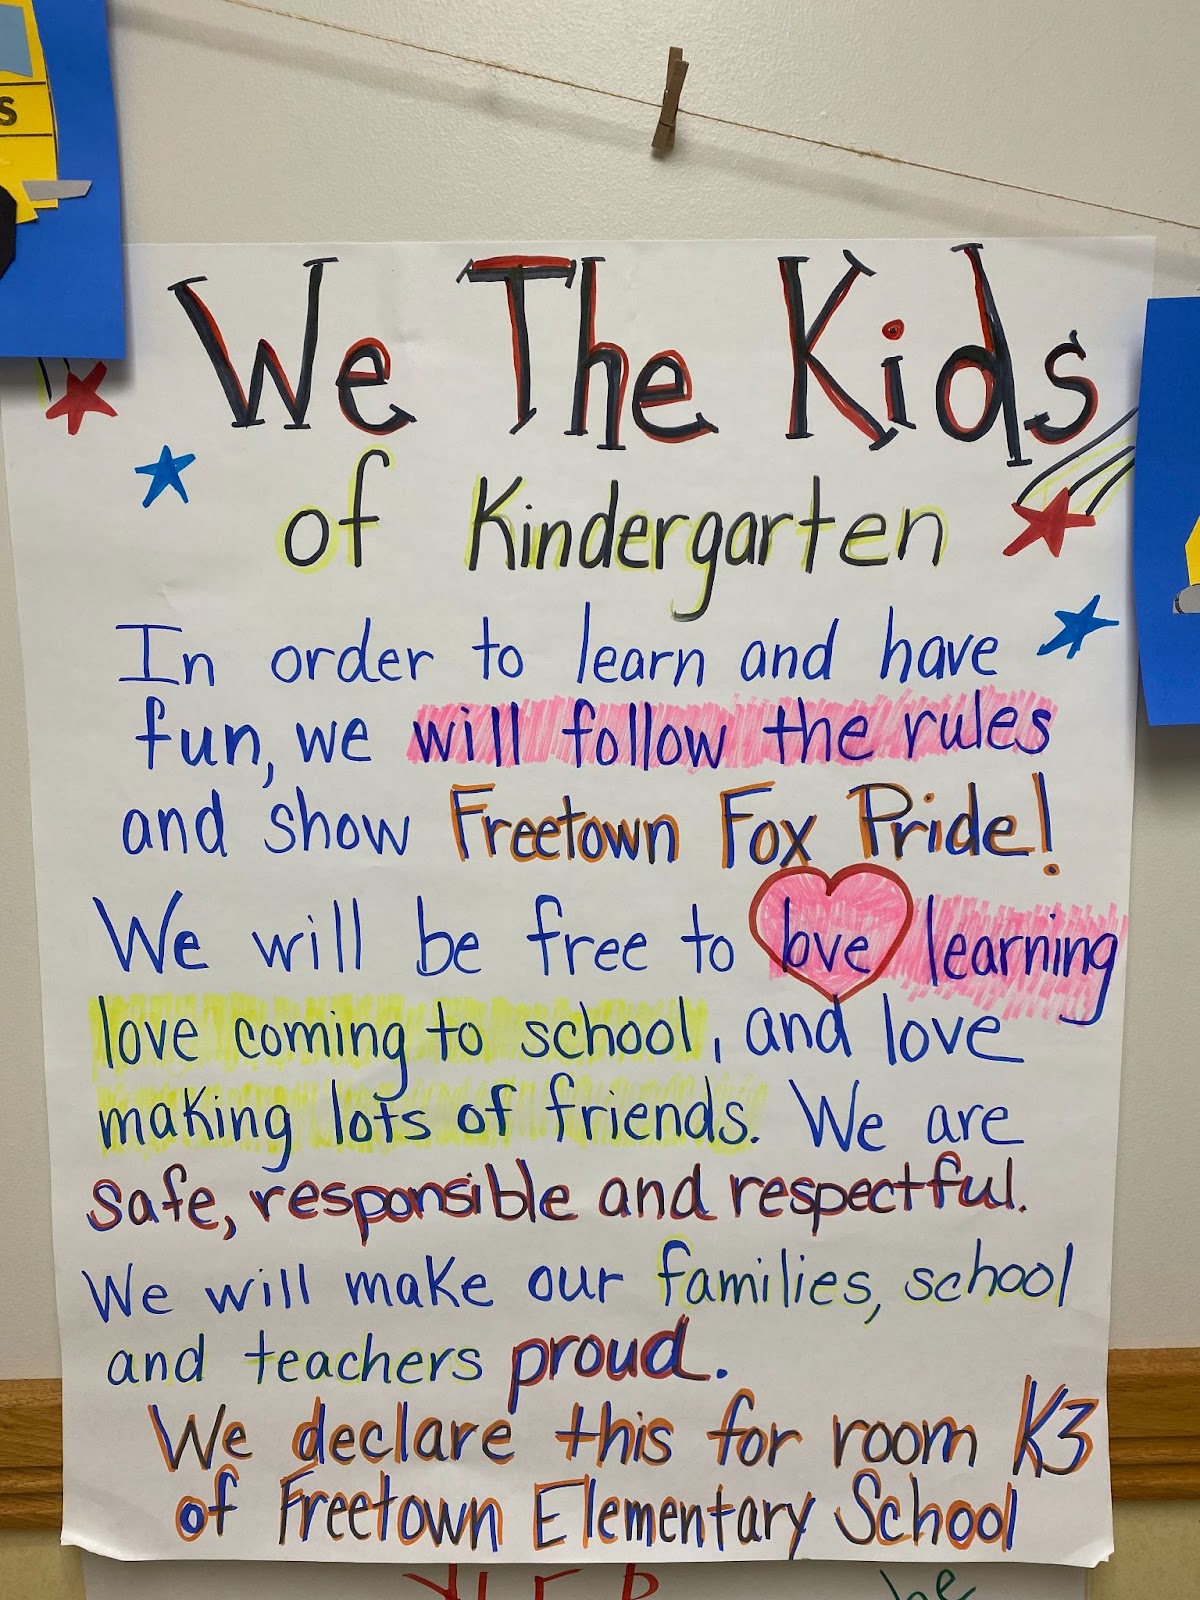 image with text We the kids of kindergarten, in order to learn and have fun we will follow the rules and show Freetown Fox Pride! We will be free to love learning, love coming to school and love making lots of friends. We are safe, responsible, and respectful. We will make our families, school, and teachers proud. We declare this for room K3 of Freetown Elementary School